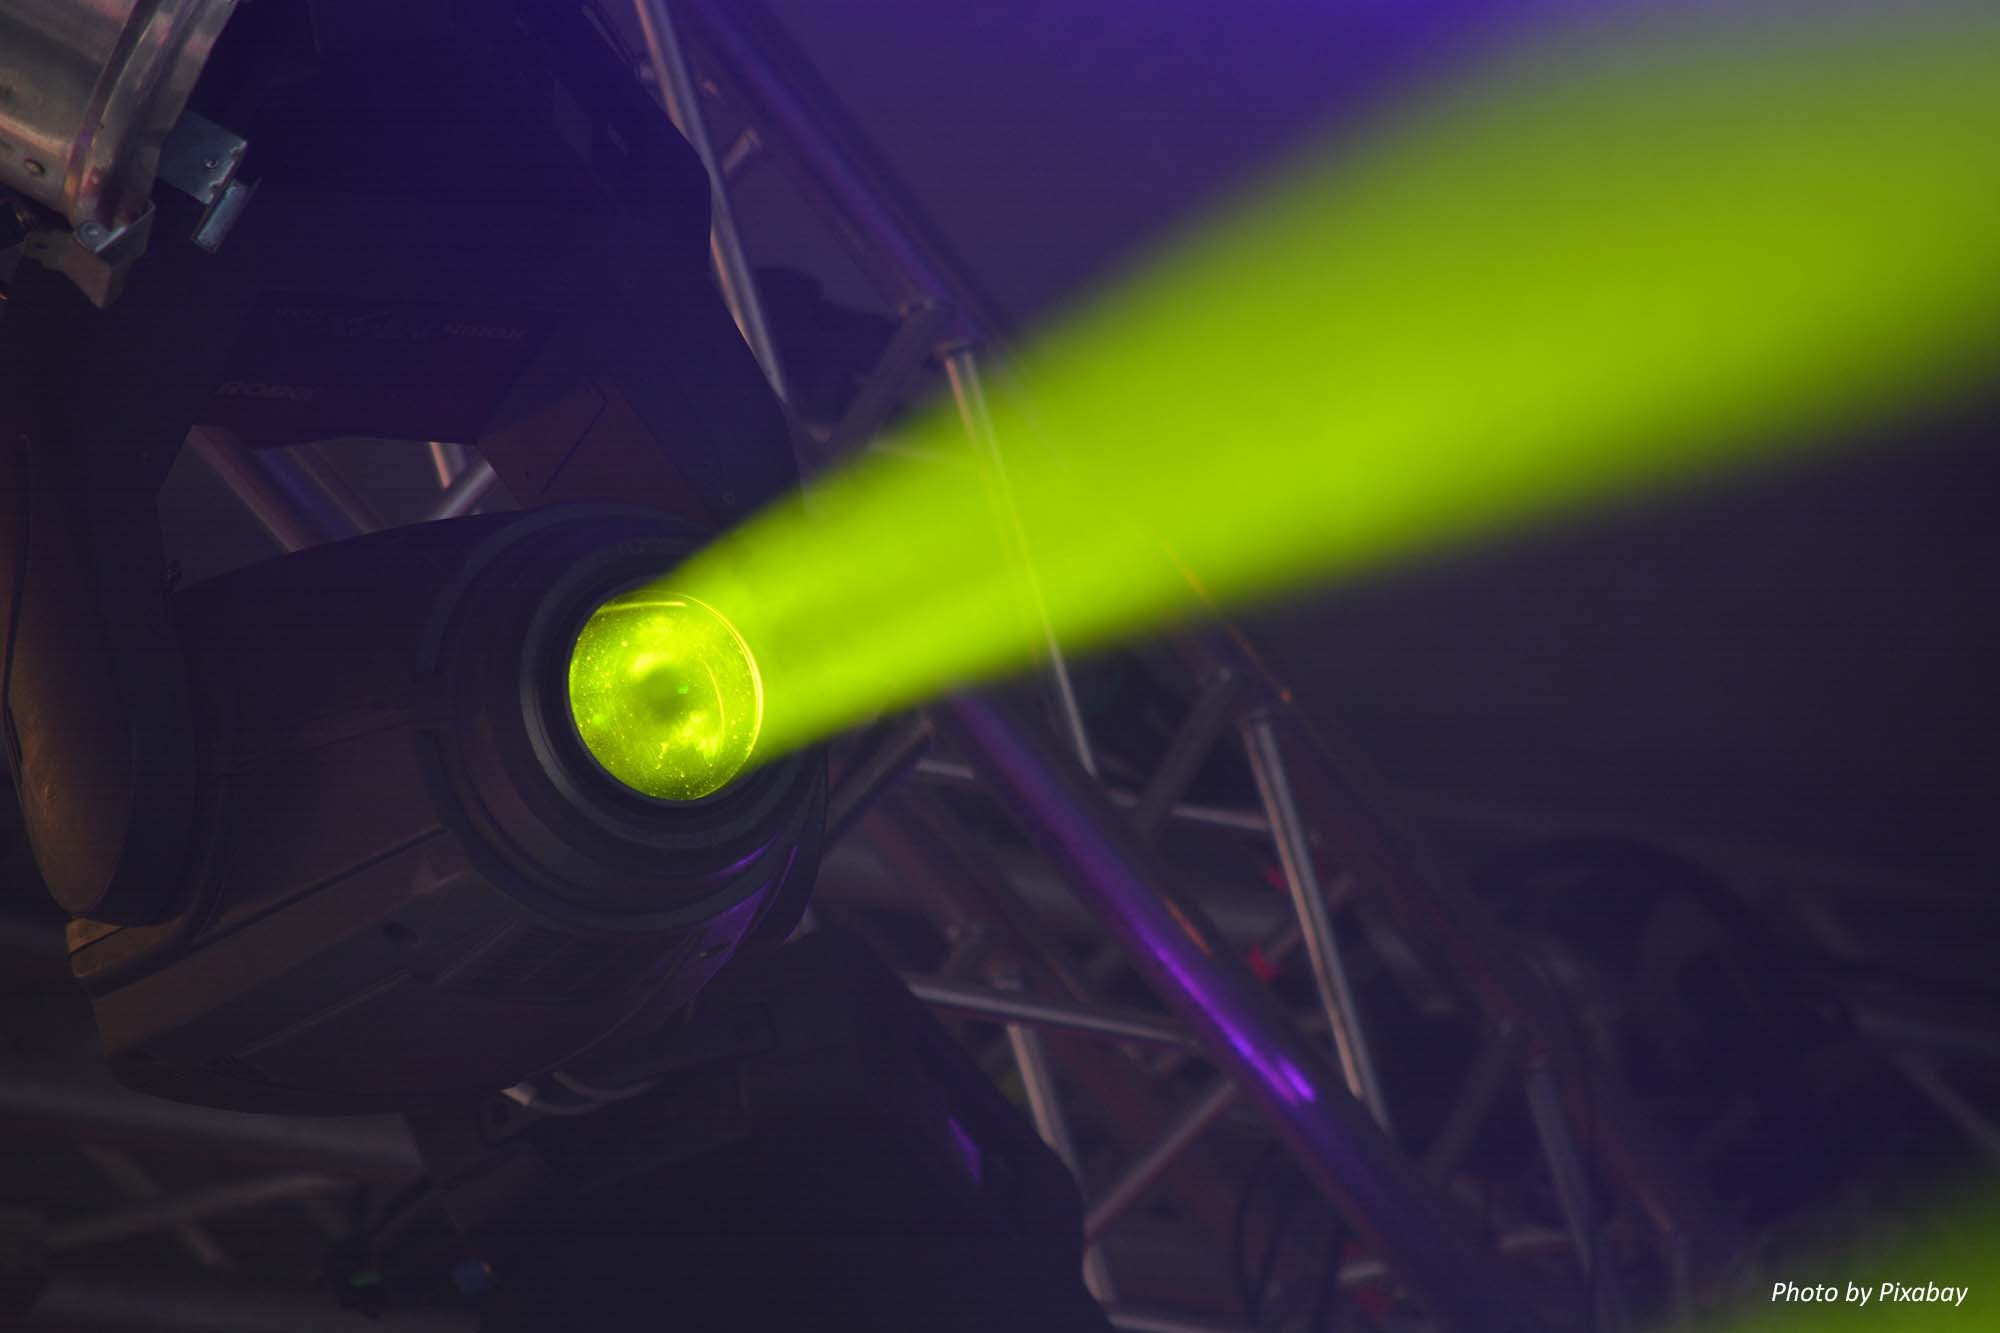 A close up view of a stage light hanging from steel stage rigging, casting a strong yellow beam of light across the darkness